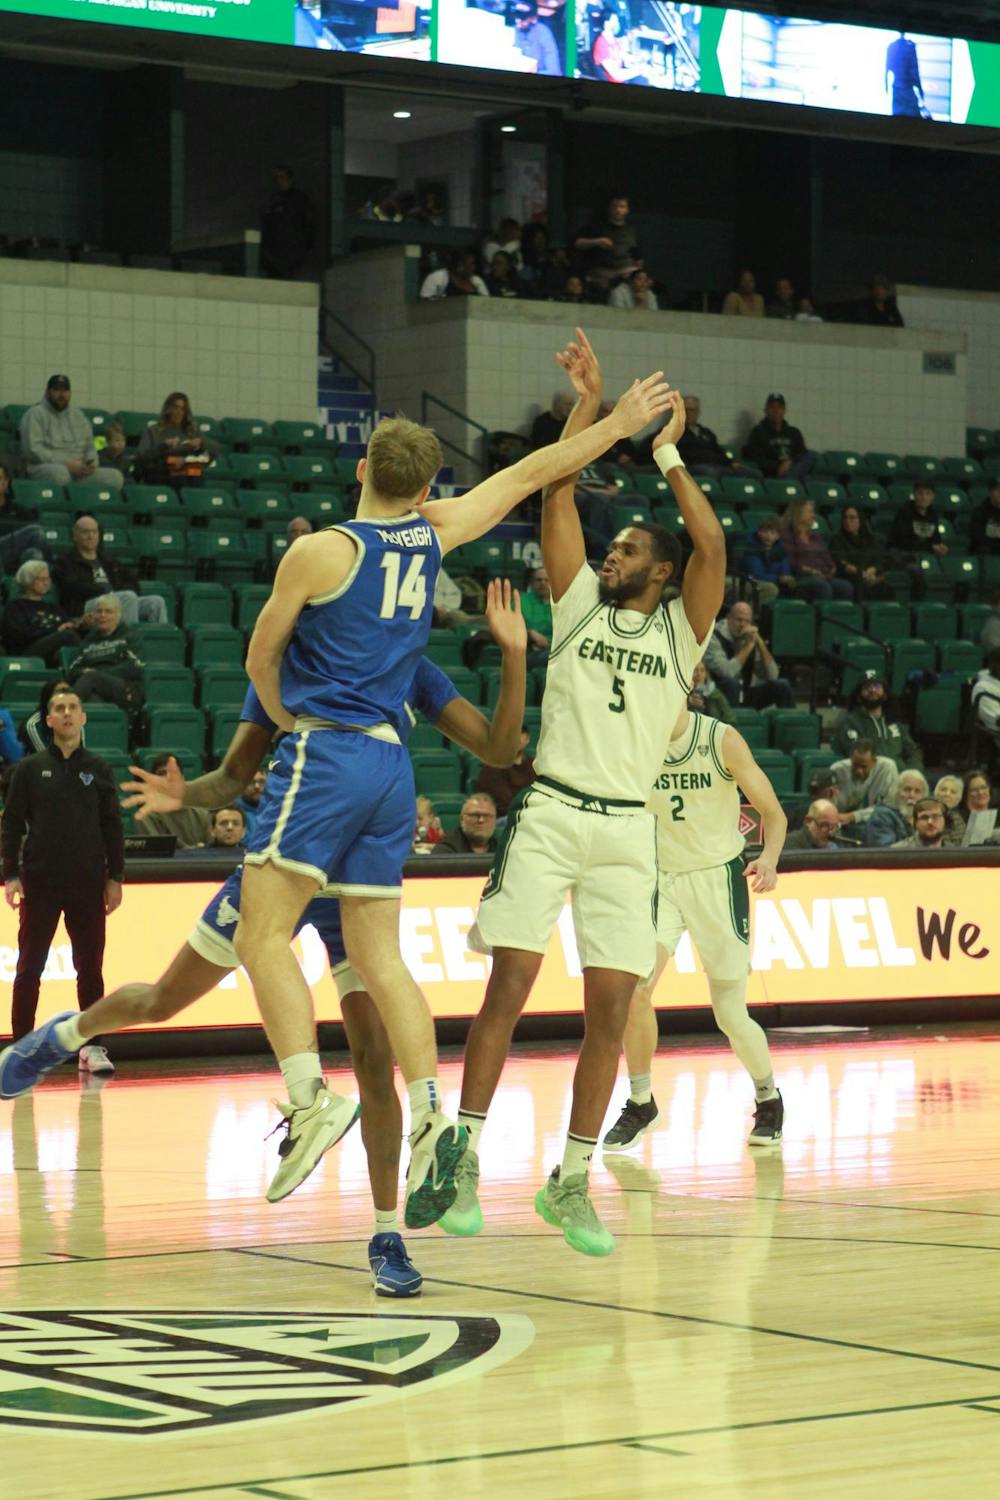 EMU basketball squad suffers MAC defeat against top-ranked Akron, 77-46